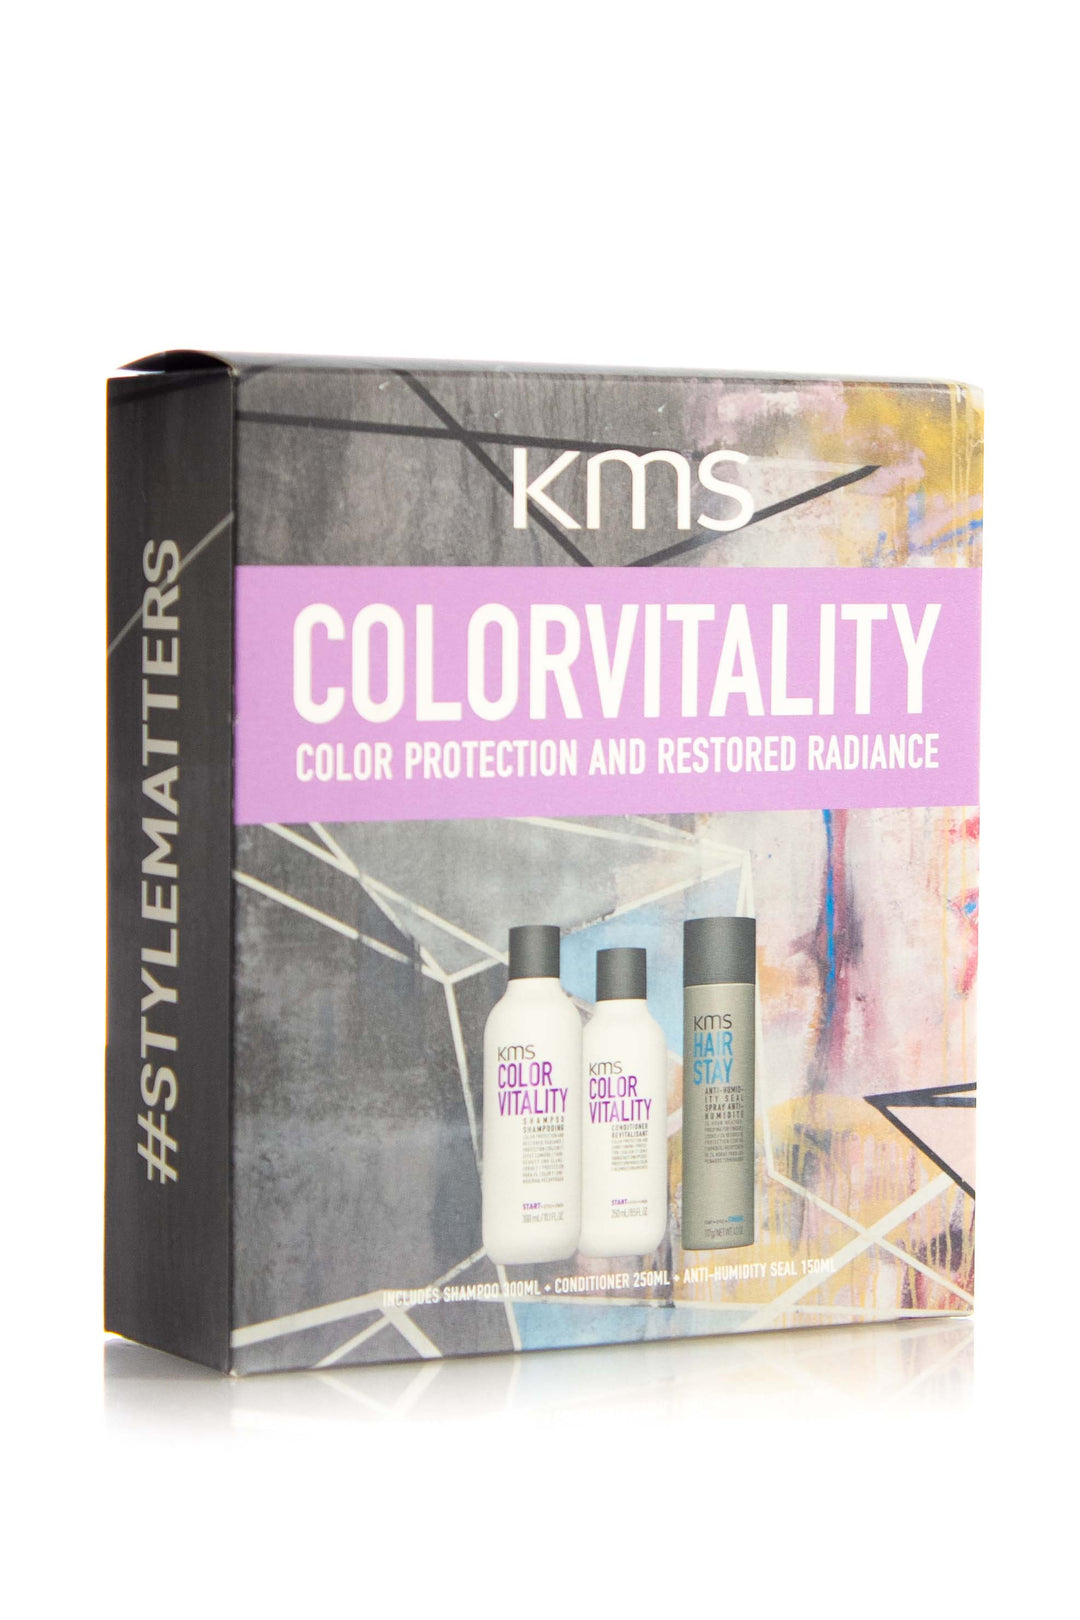 kms-colorvitality-trio-pack